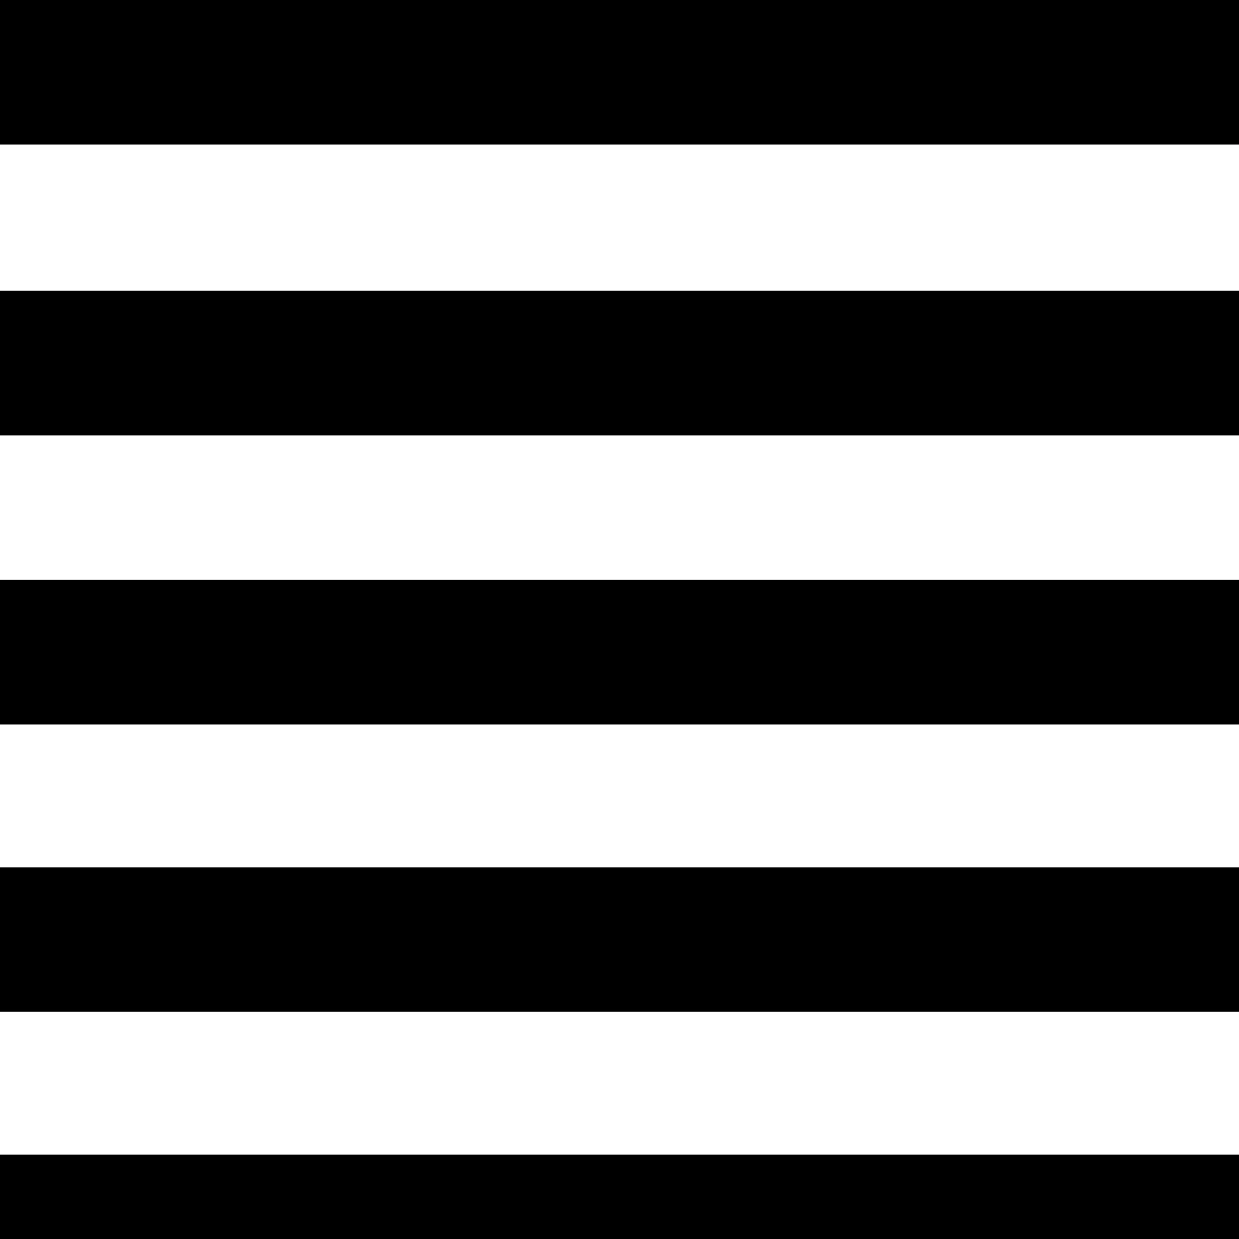 Home Backdrops Stripes Black And White Horizontal Stripes - Horizontal Black And White Striped , HD Wallpaper & Backgrounds